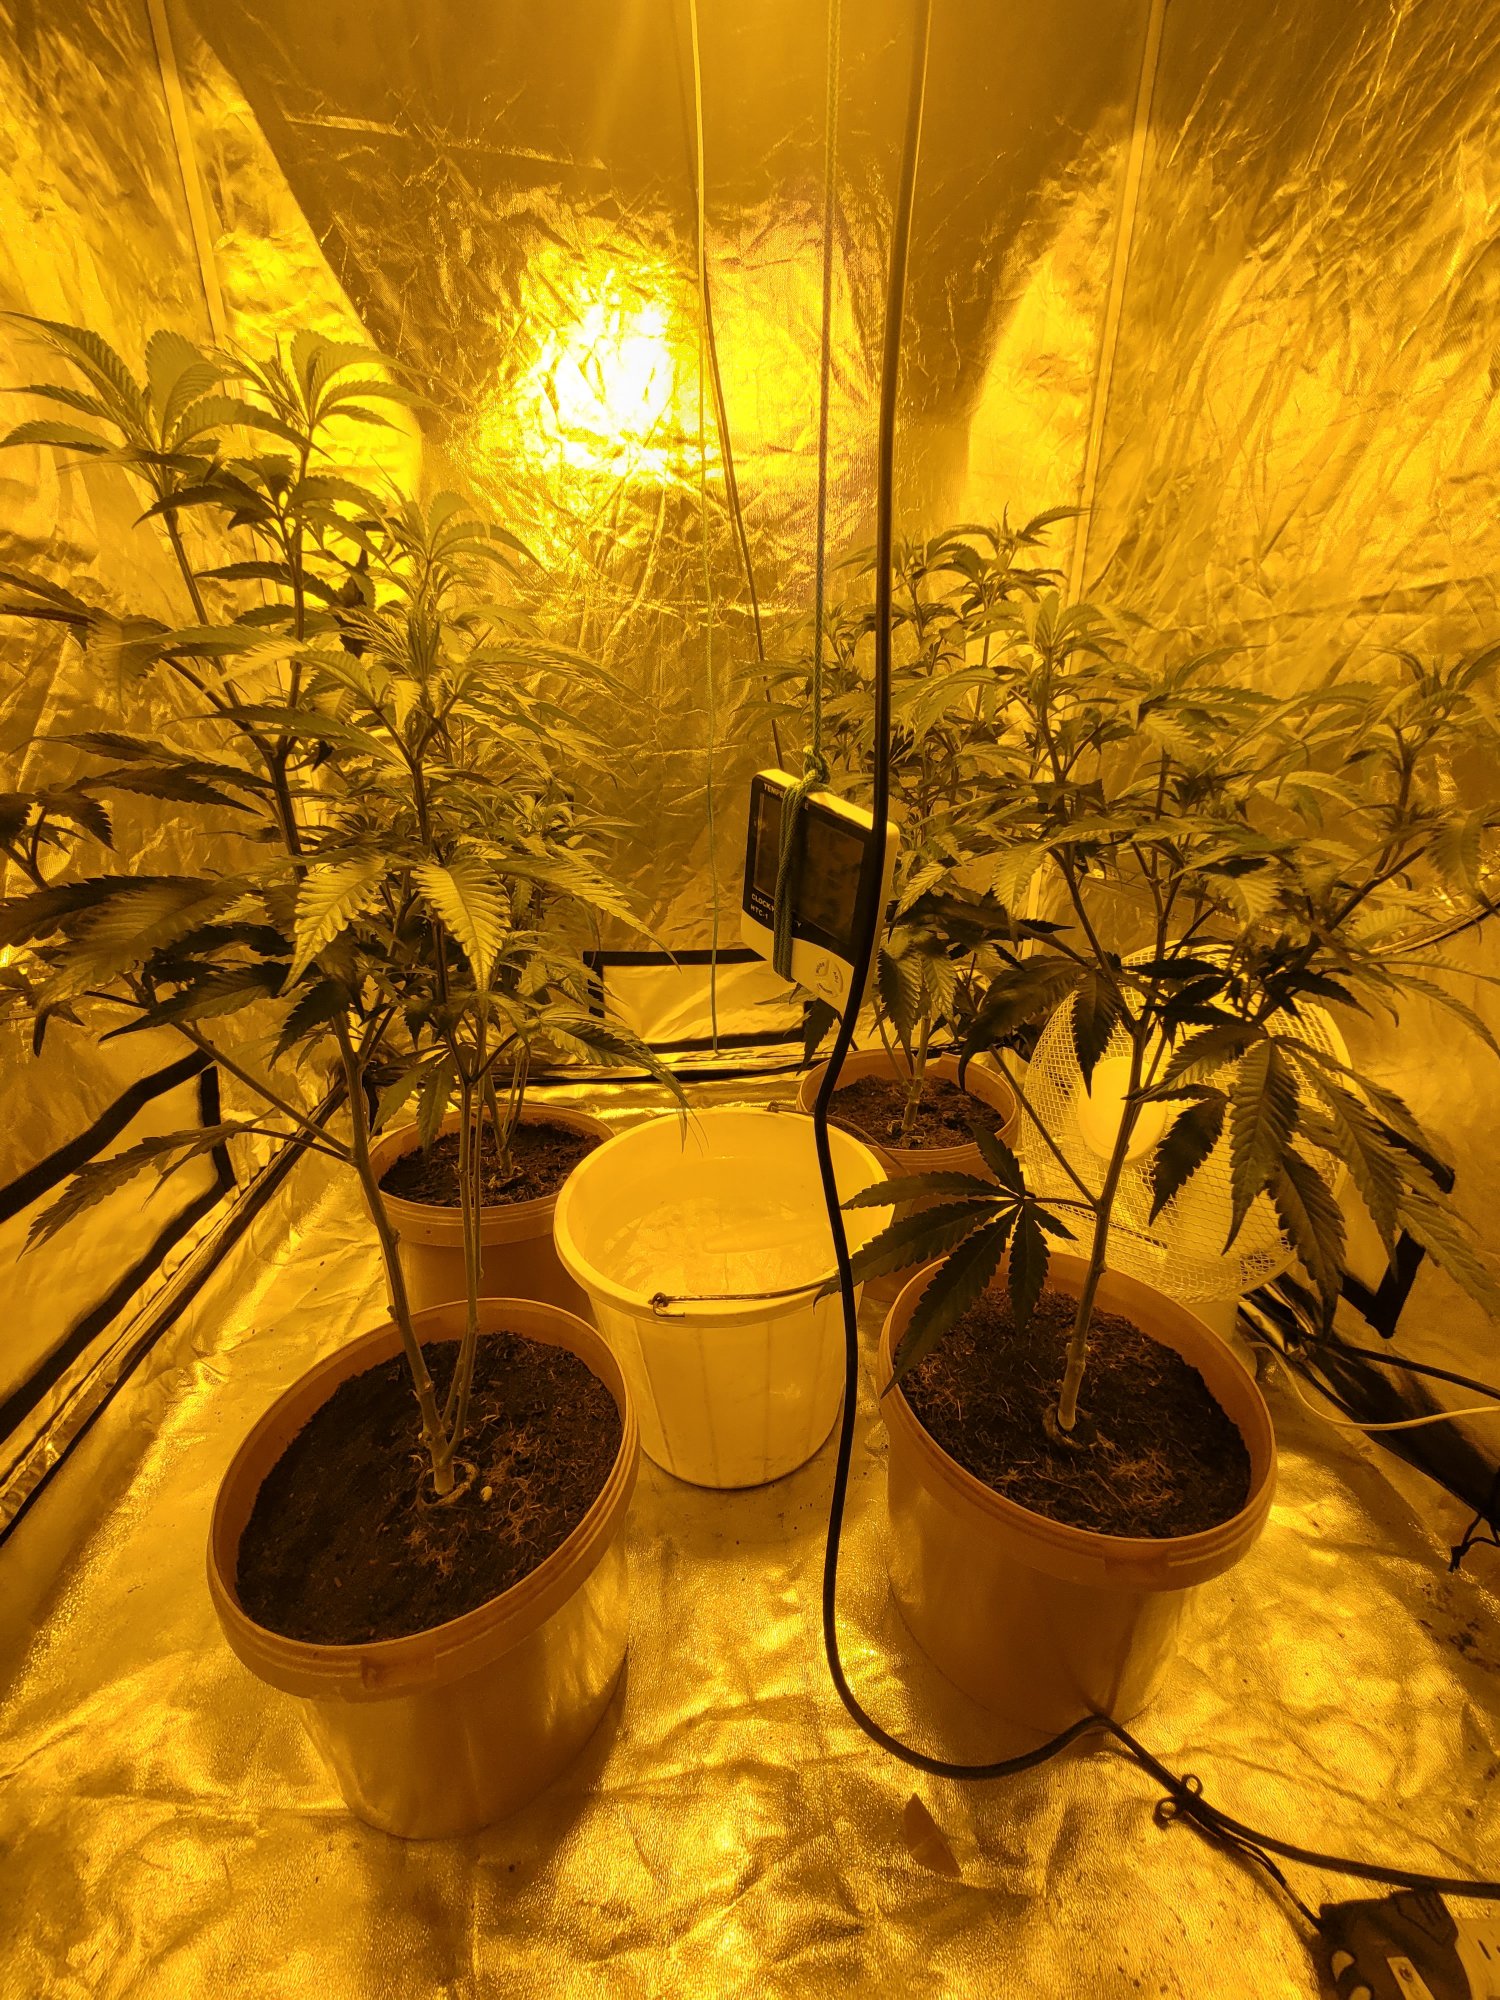 Into the 5th week of veg